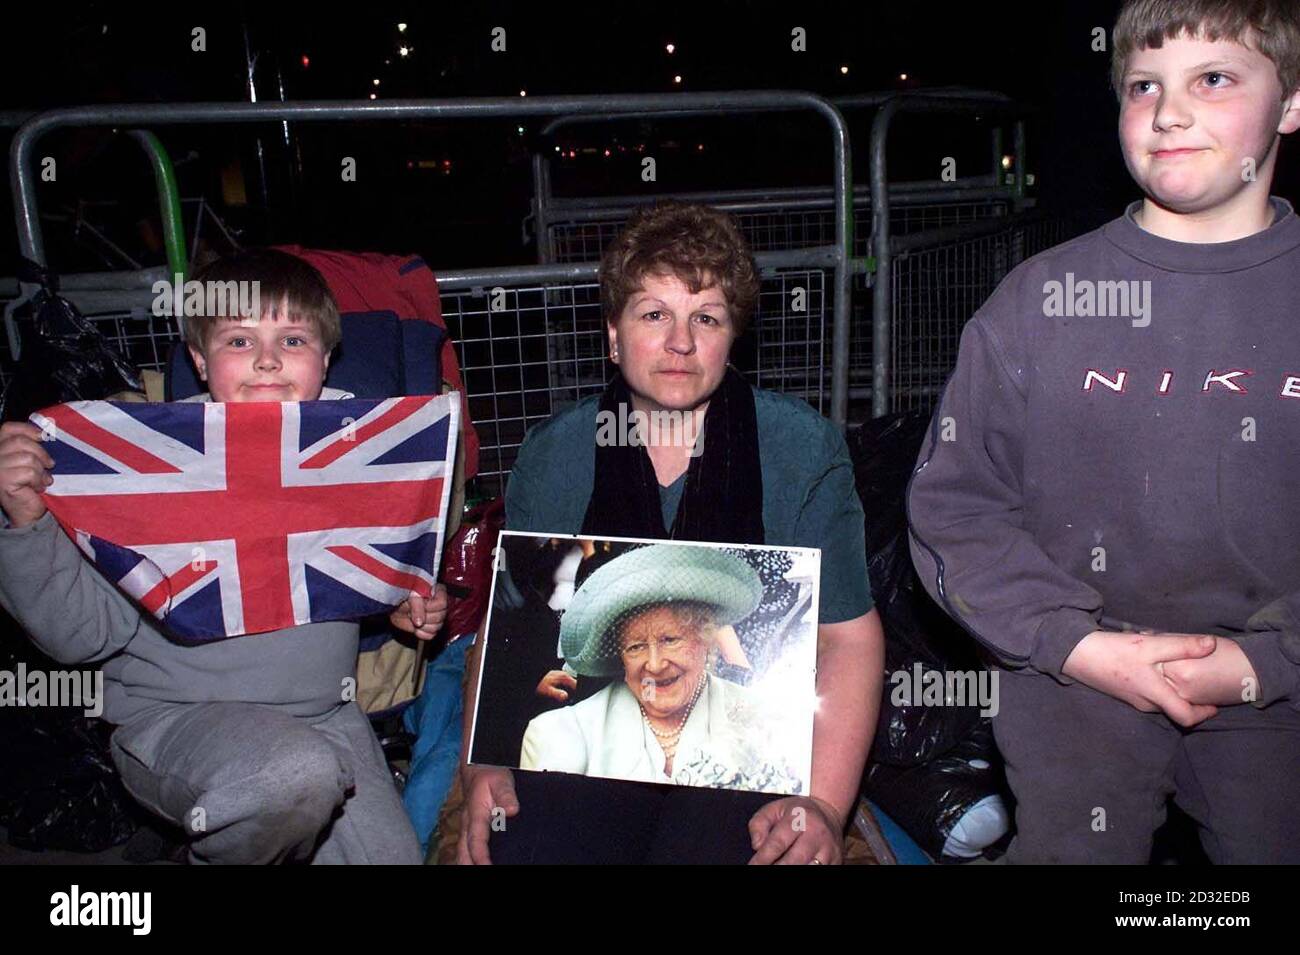 Jennifer Hawkins, from Worthing Sessex, flanked by brothers Christopher (left) and Thomas Pont from Attlebrough Norfolk, camped on the pavement outside The Palace of Westminster, in anticipation of the procession of the Queen Mother's coffin.  *... which is to lie in state in the Great Hall, until her funeral. Stock Photo